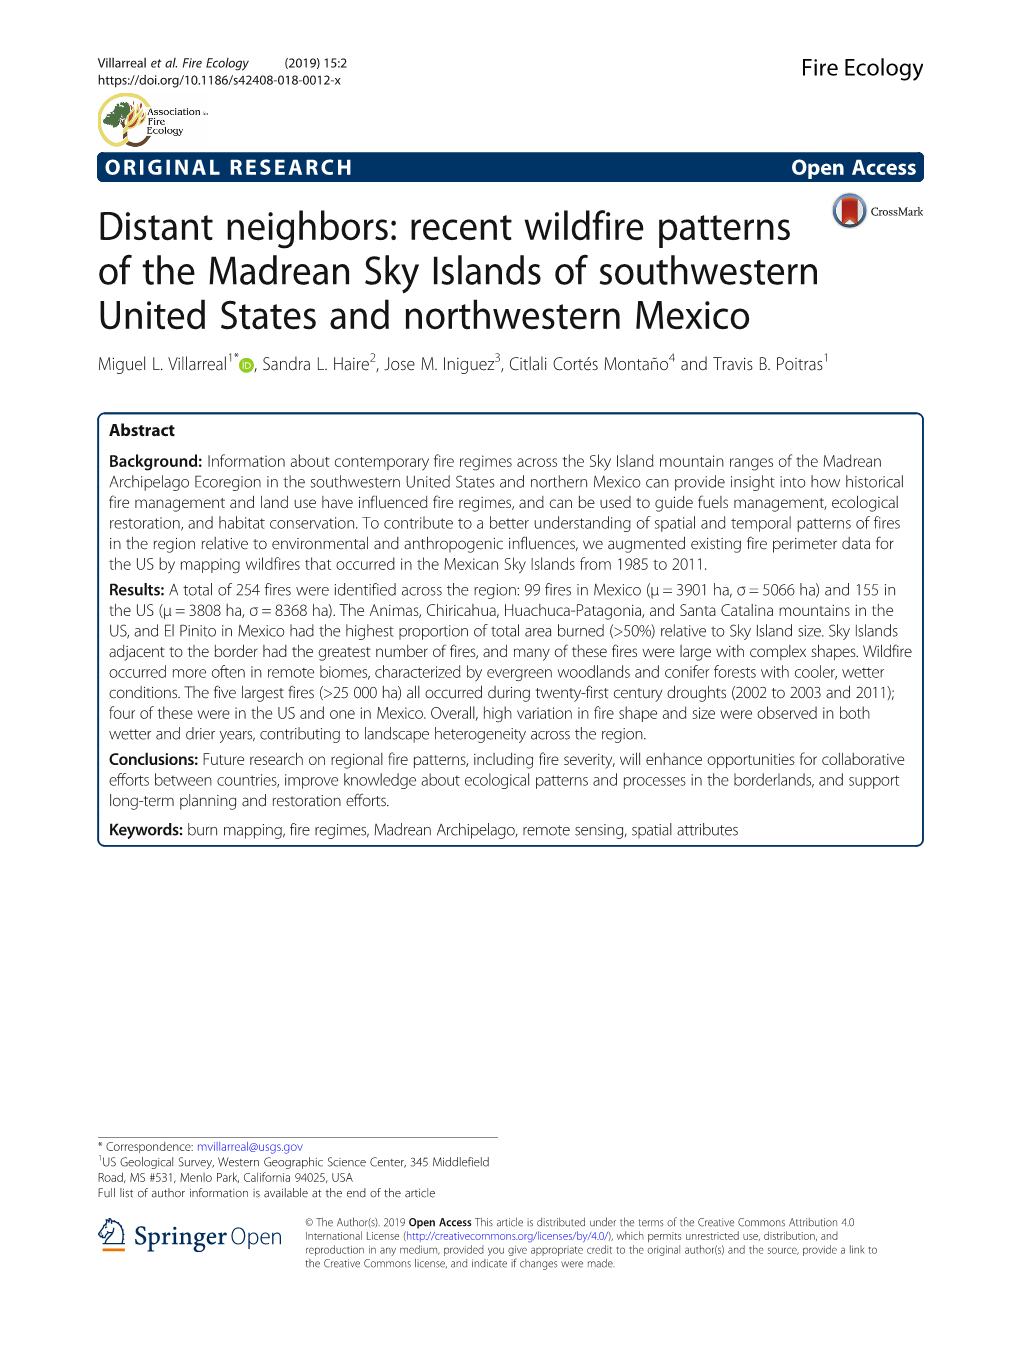 Recent Wildfire Patterns of the Madrean Sky Islands of Southwestern United States and Northwestern Mexico Miguel L